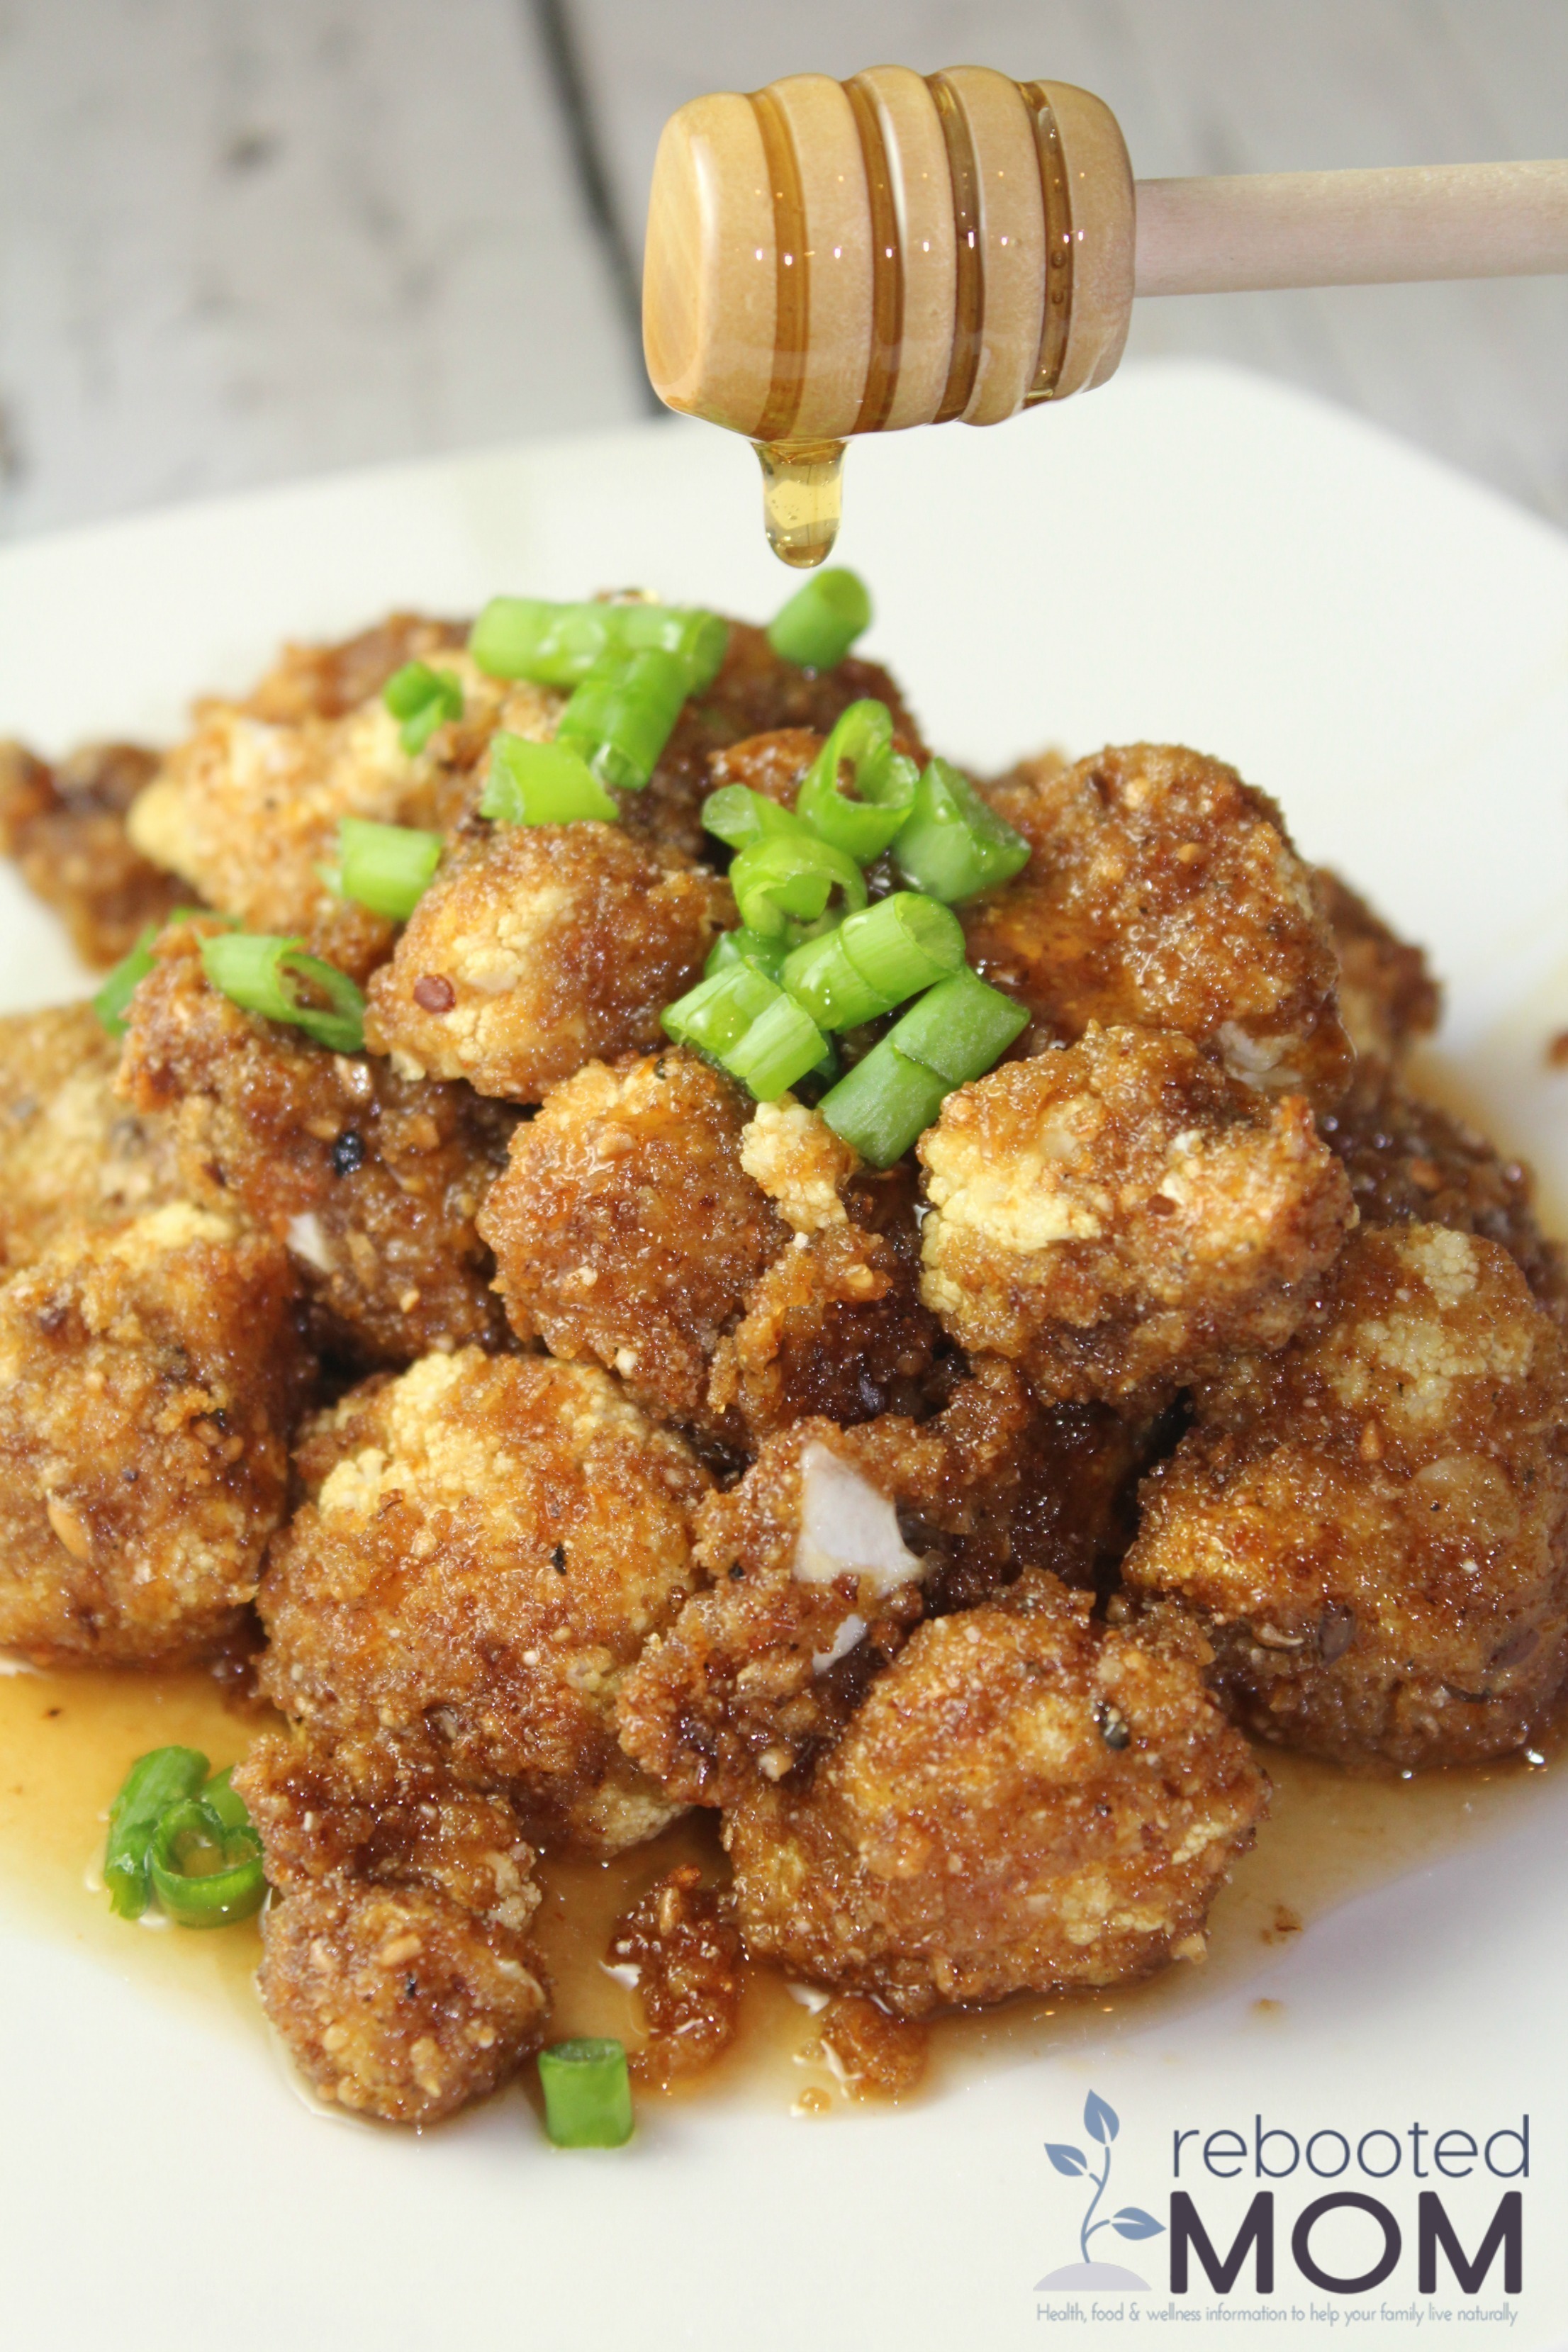 This healthy honey garlic baked cauliflower comes together easily with simple ingredients and is perfect for a simple meatless meal option!